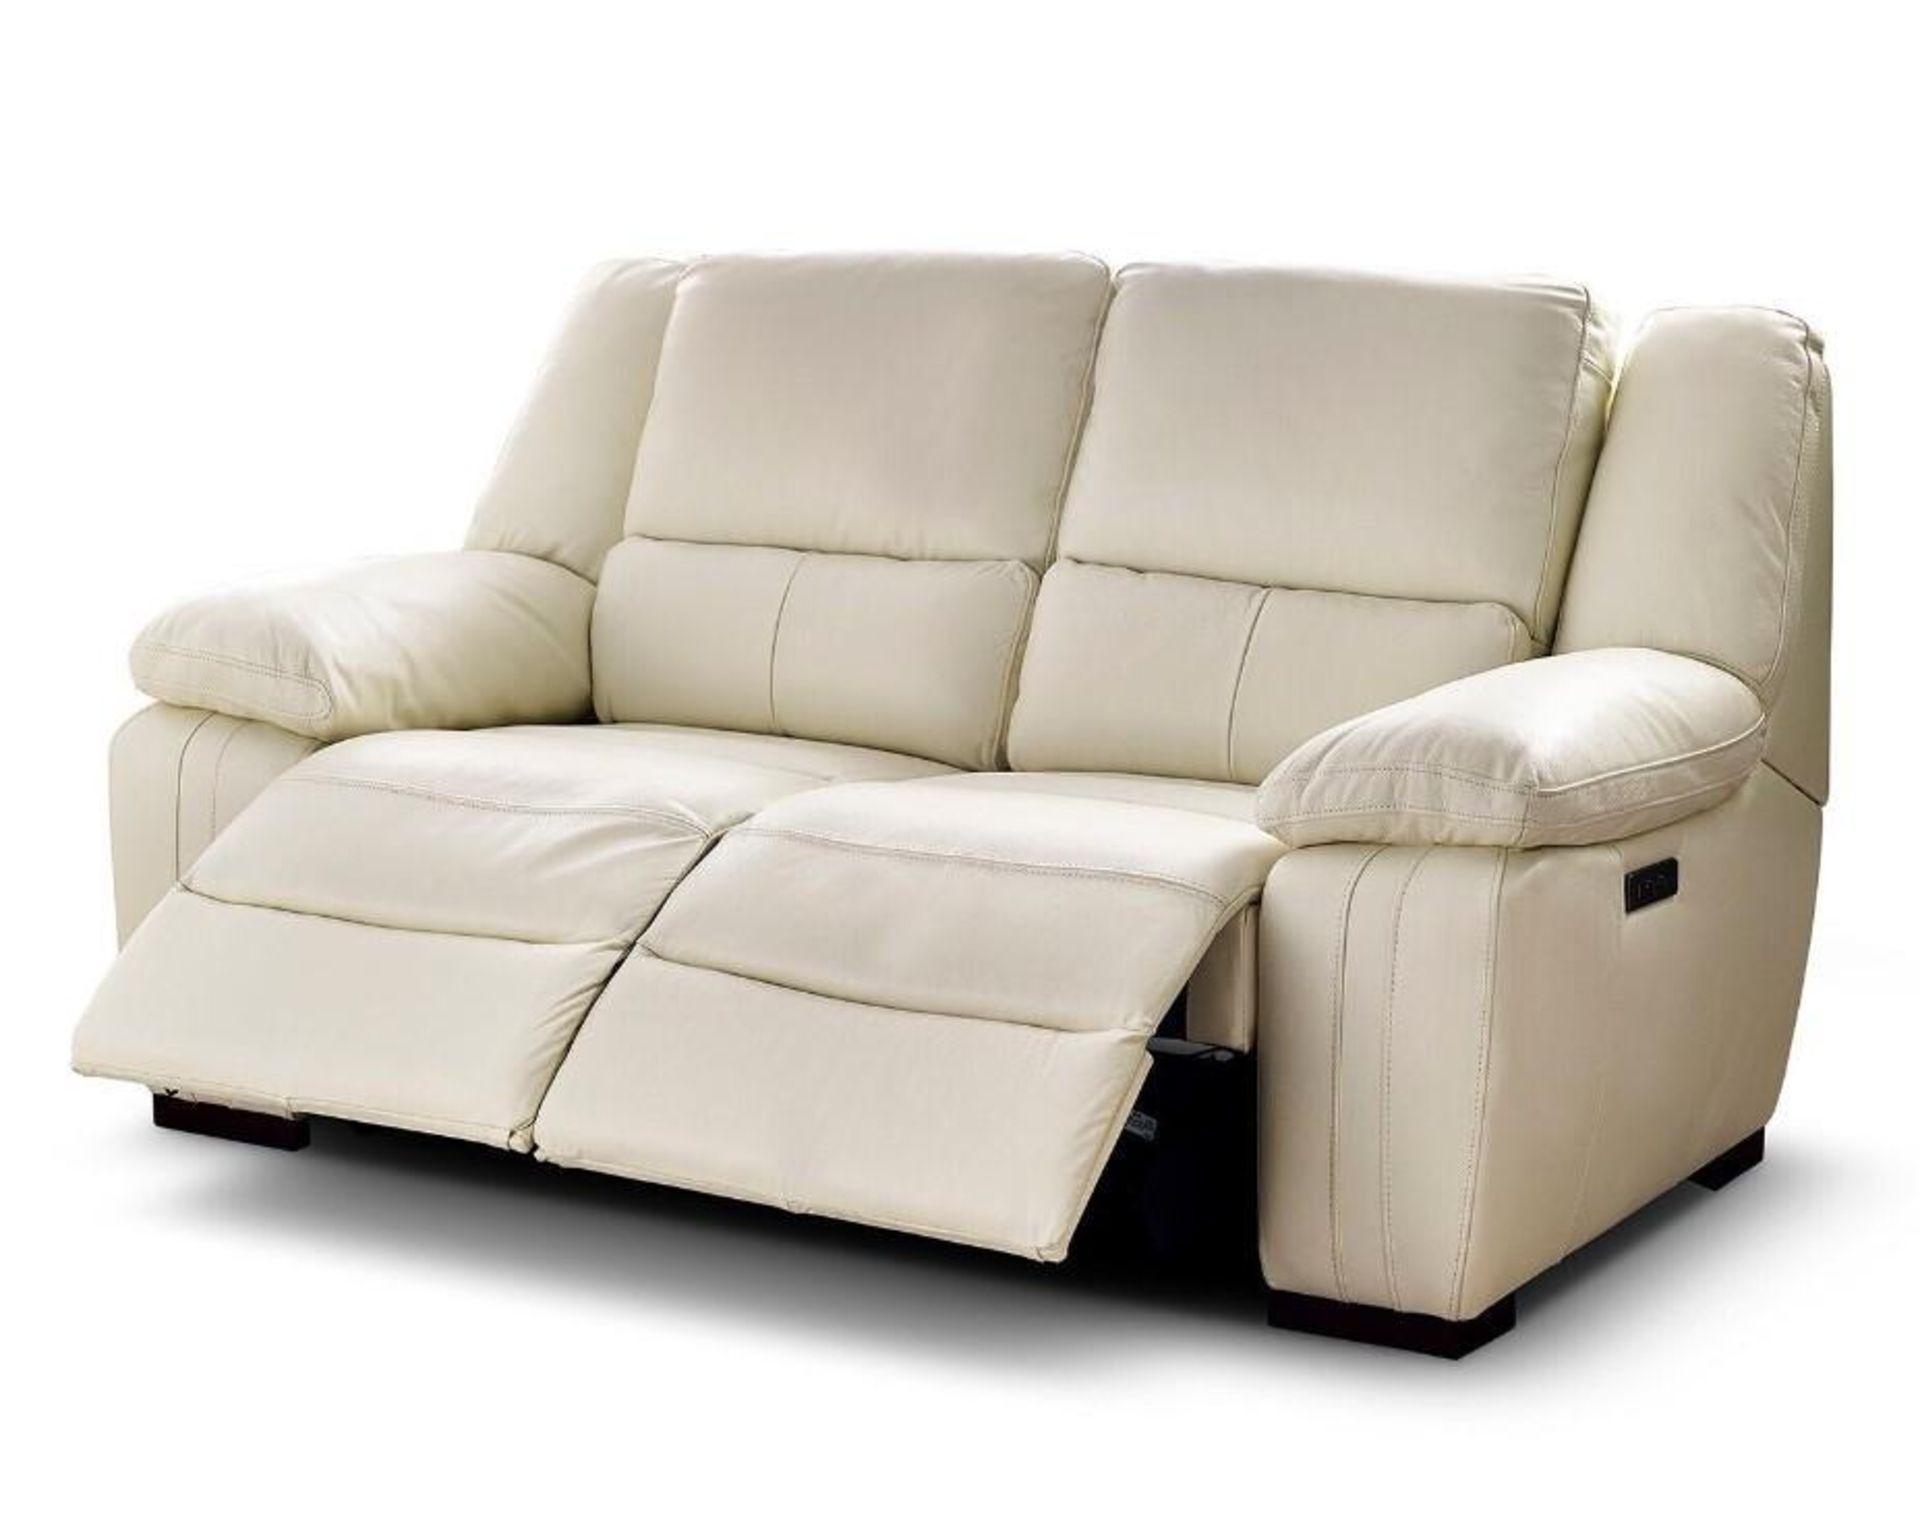 Brand new and boxed SCS Fallon 2 seater electric reclining sofa in Cream. - Image 3 of 7